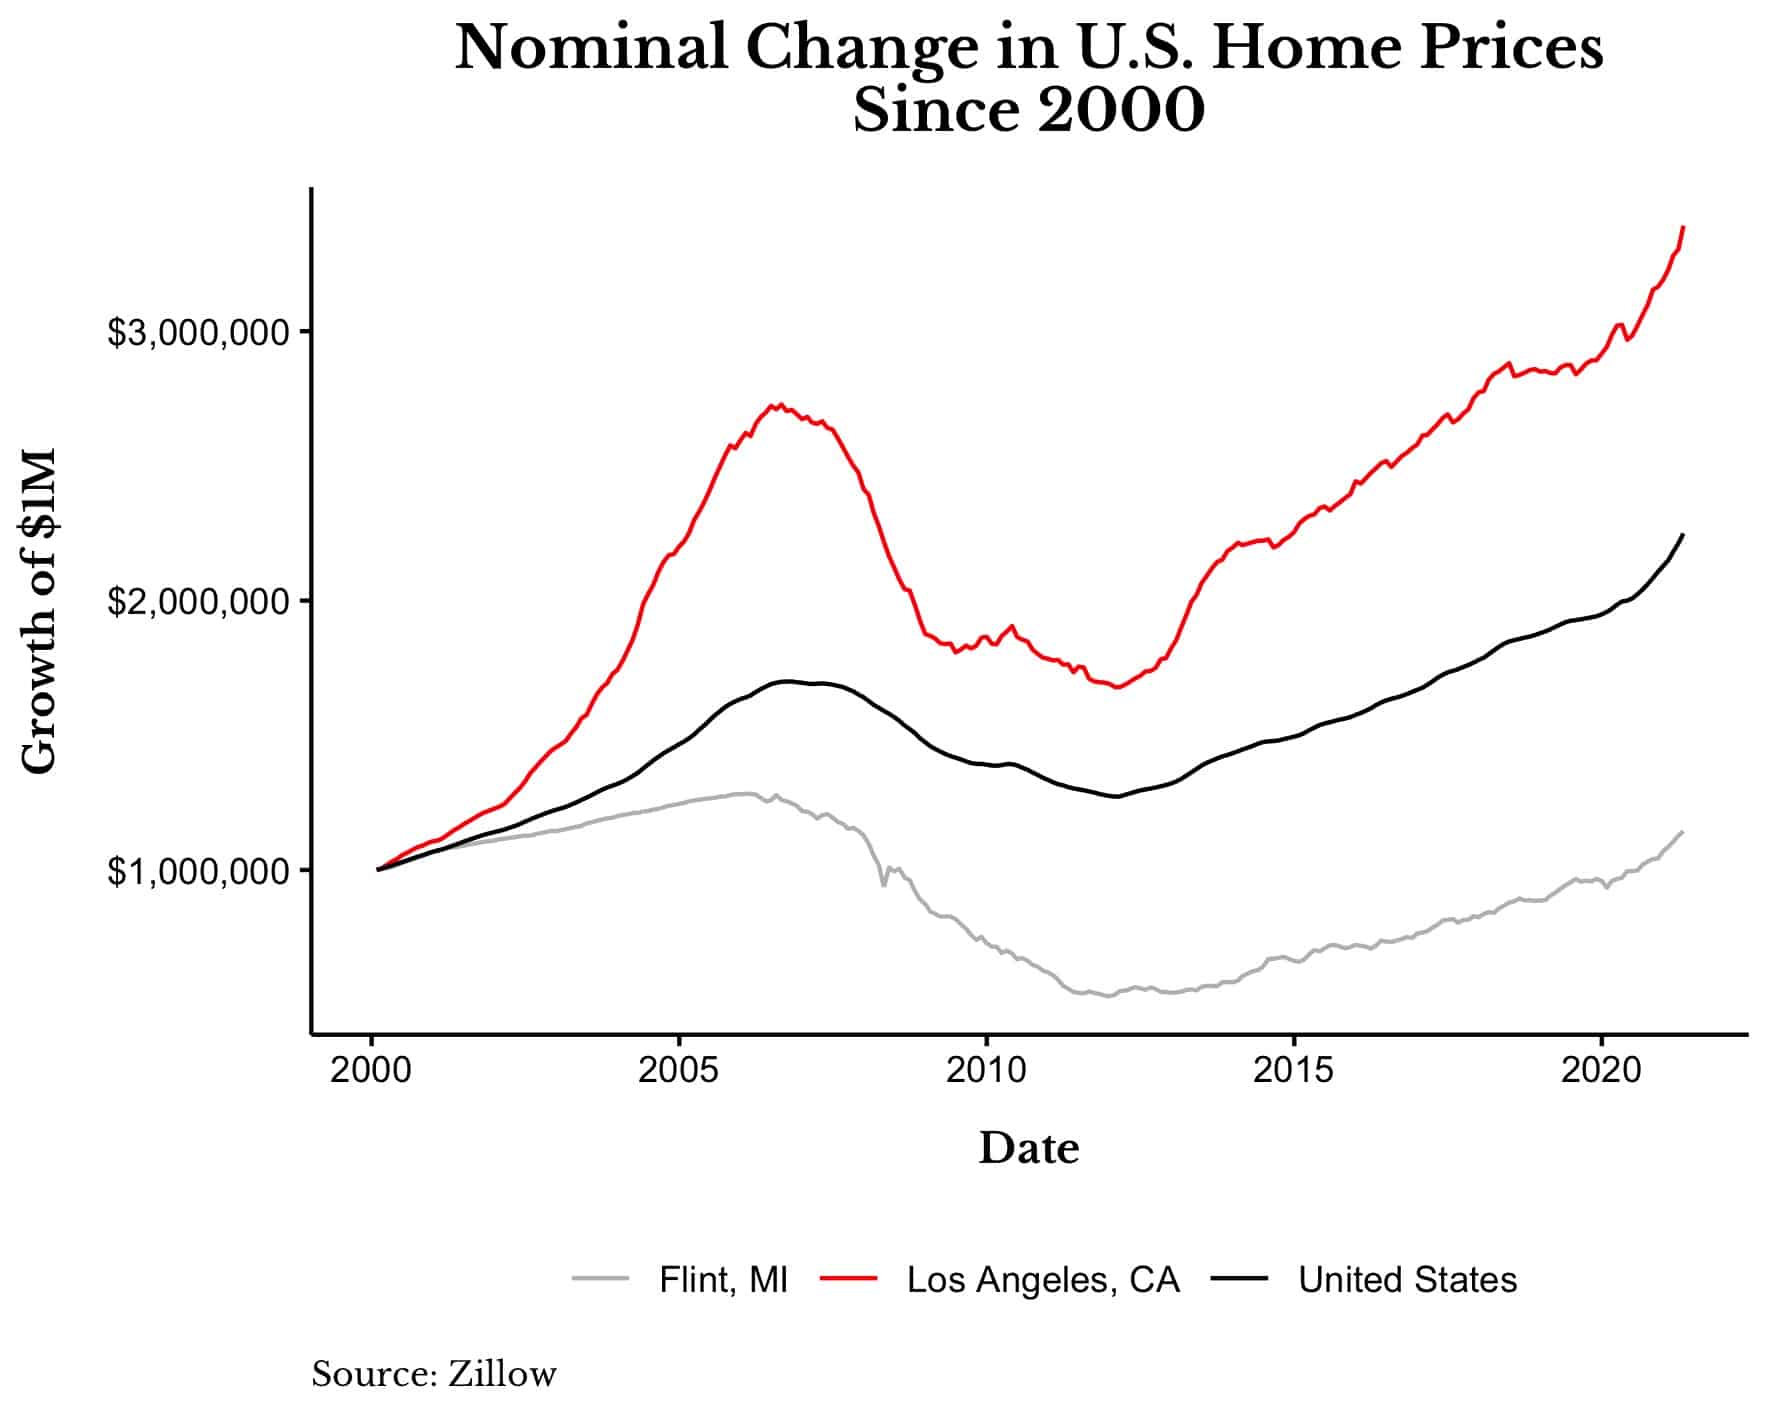 Nominal change in US home prices since 2000